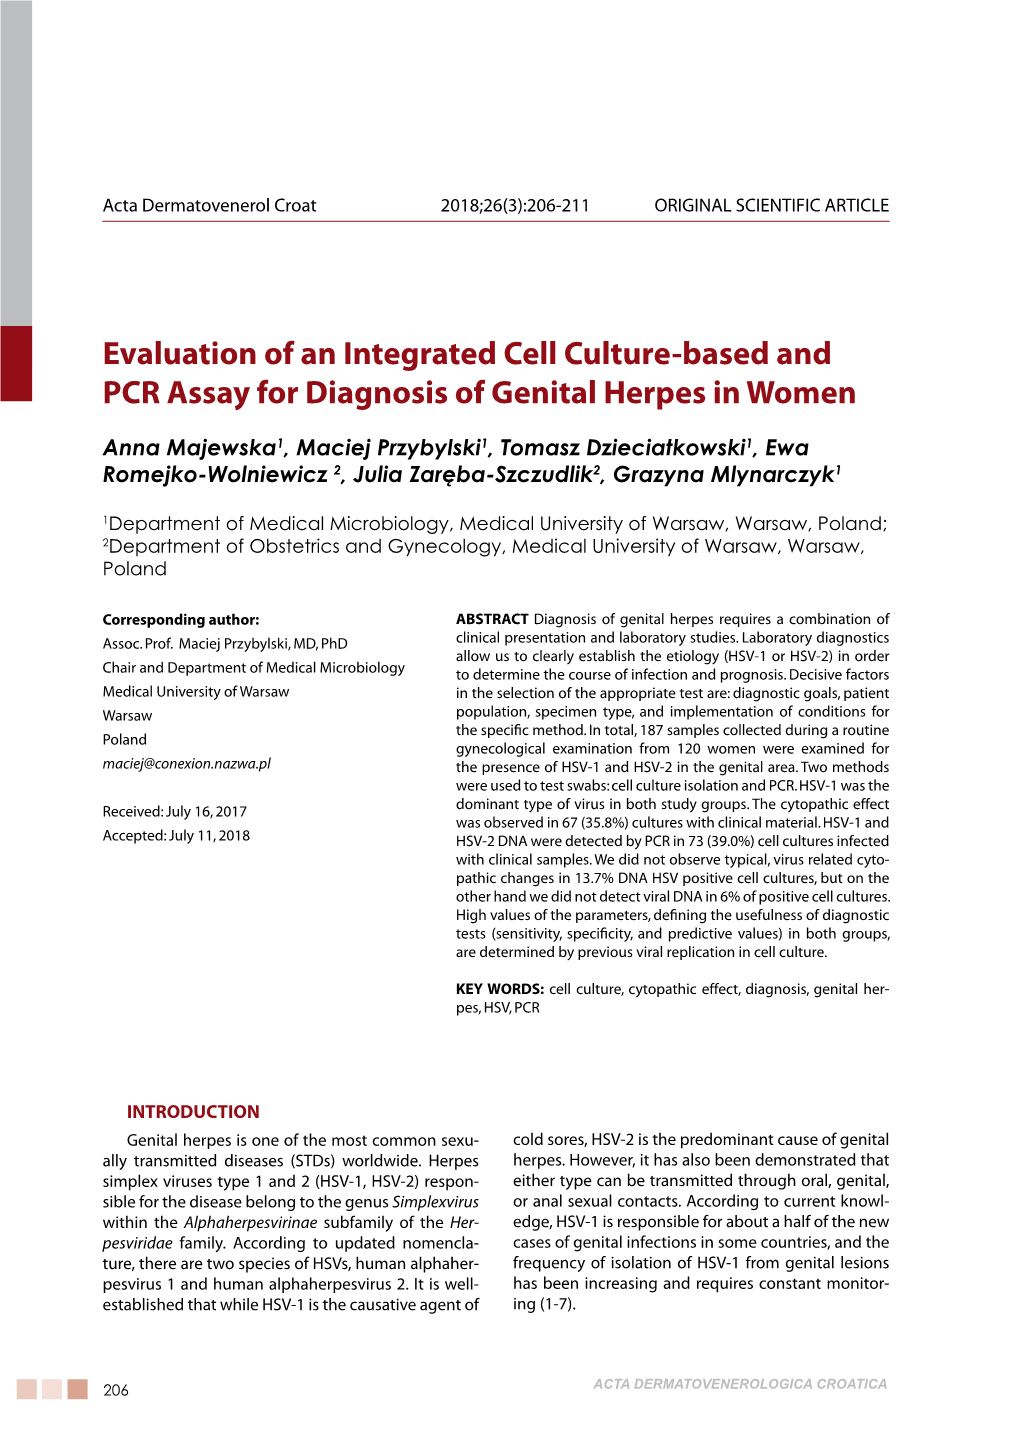 Evaluation of an Integrated Cell Culture-Based and PCR Assay for Diagnosis of Genital Herpes in Women